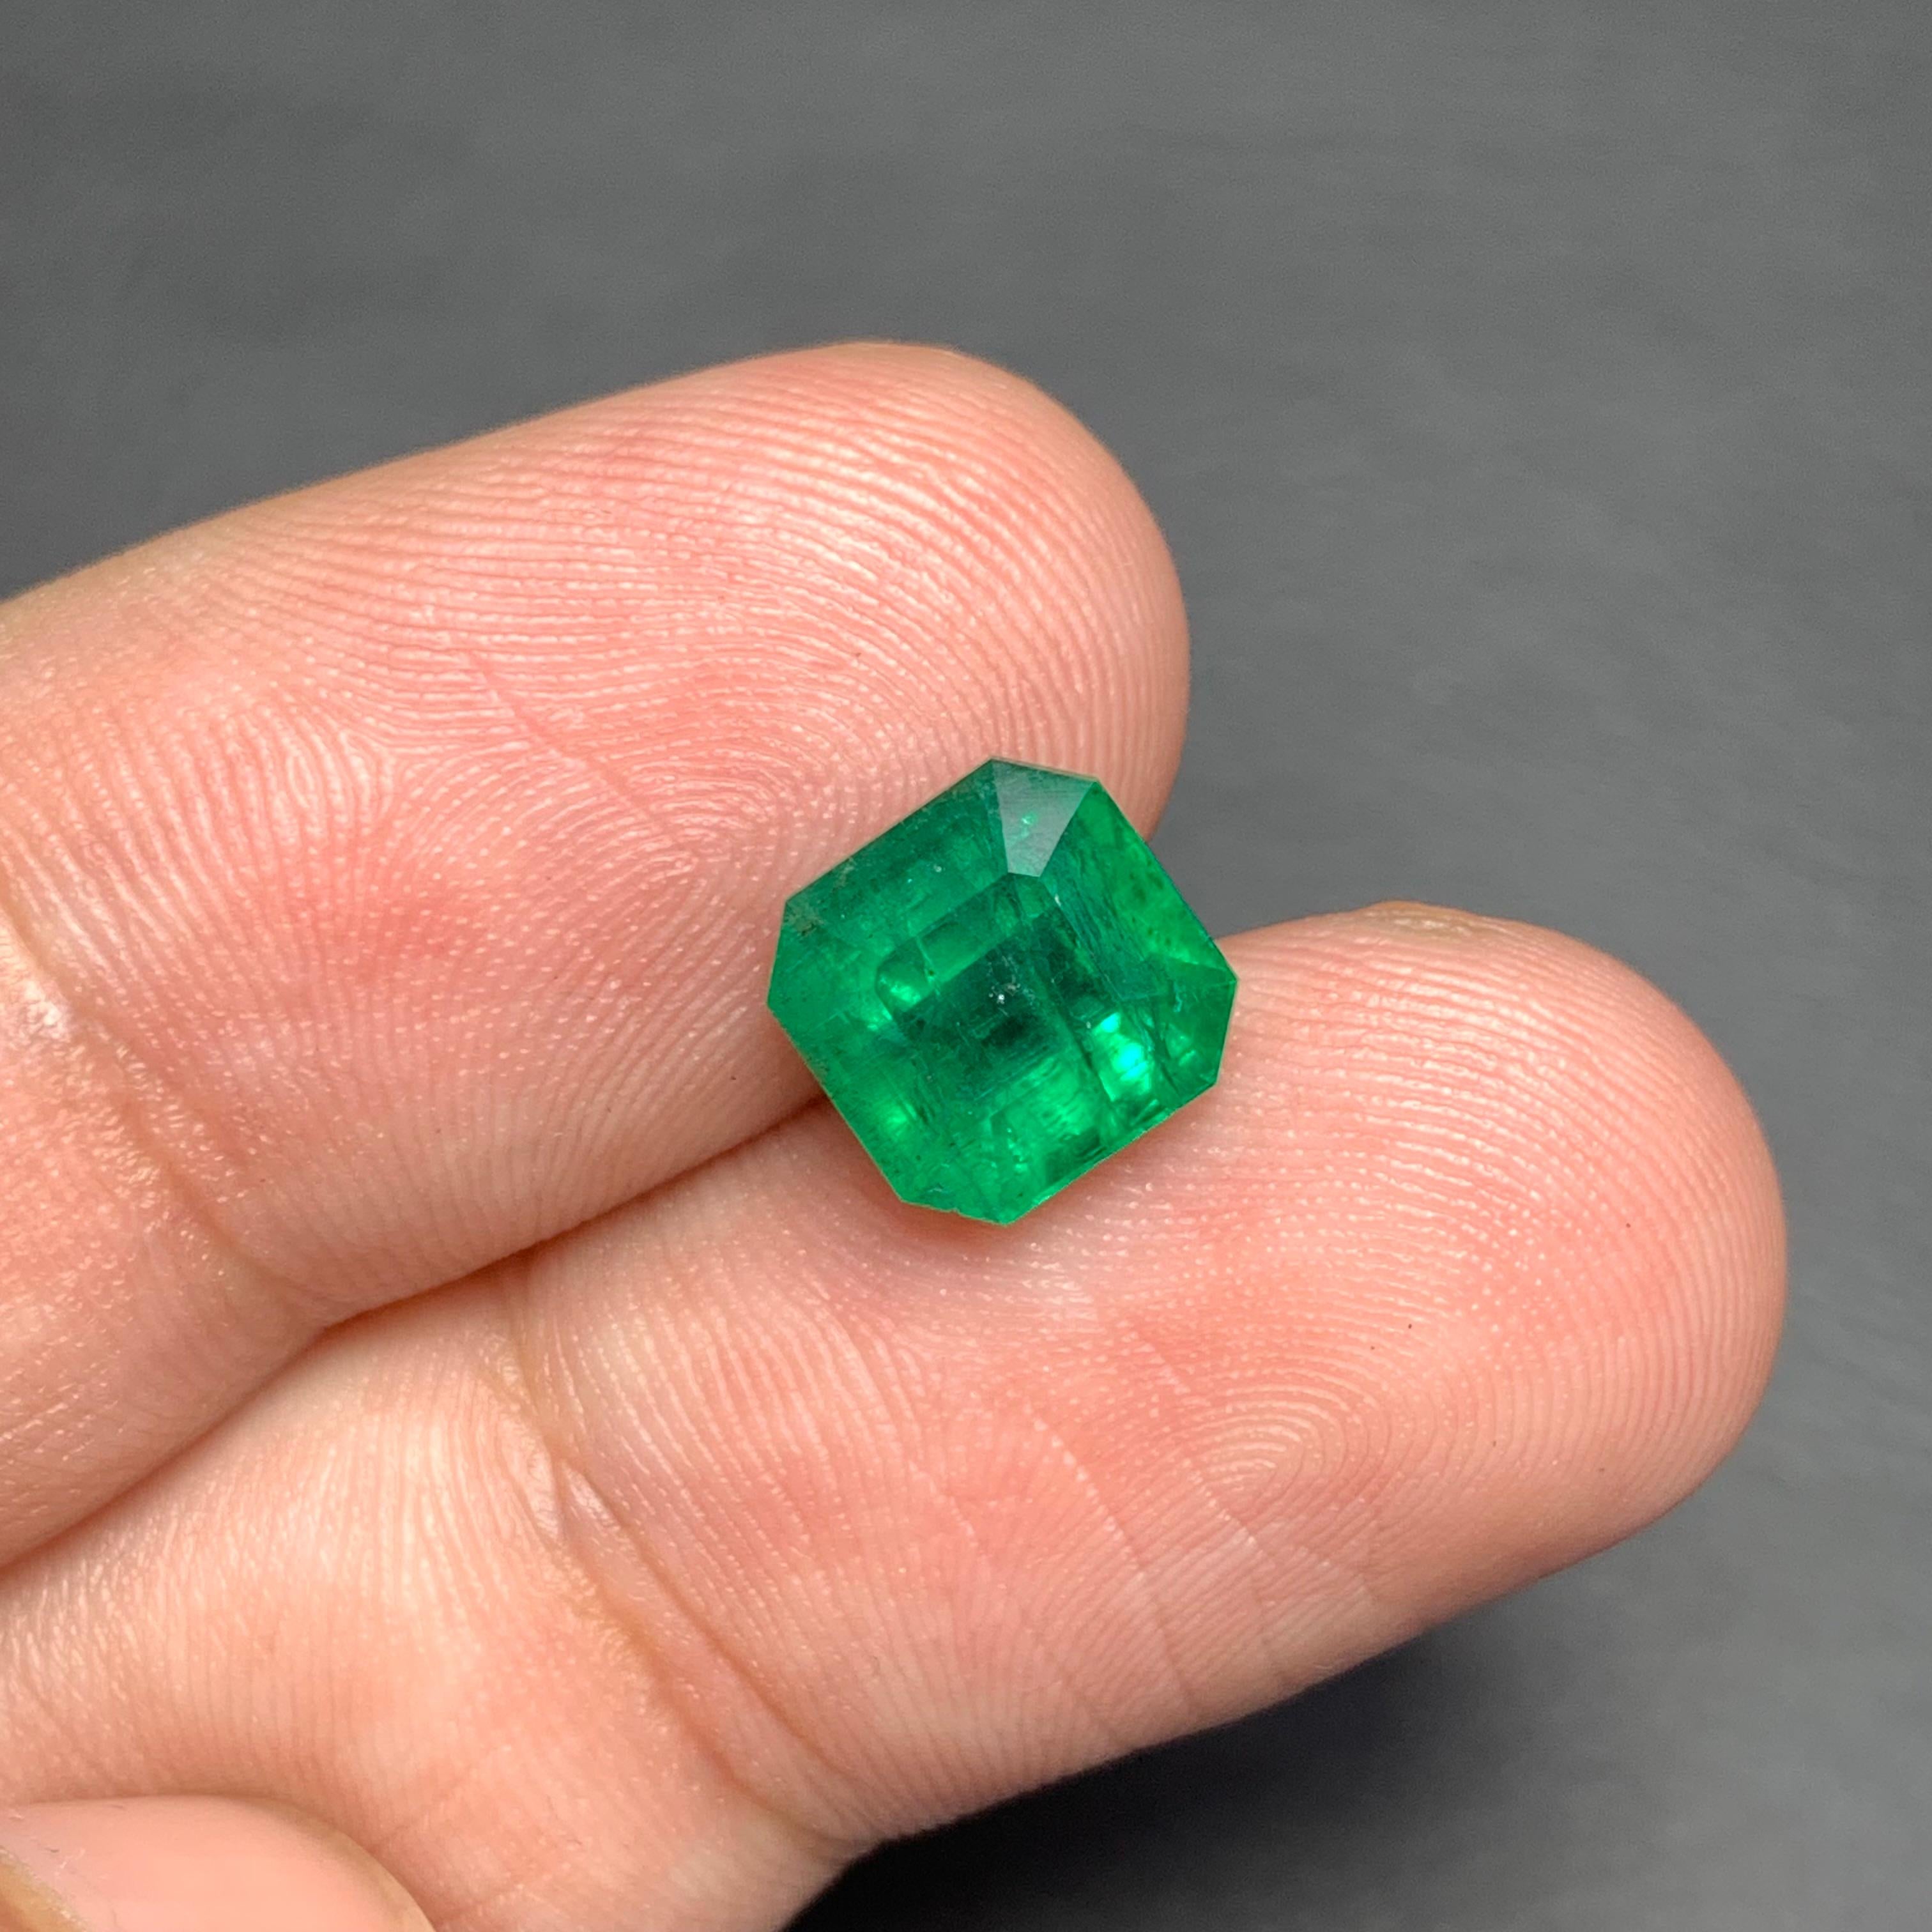 Loose Emerald 
Weight: 2.80 Carats 
Dimension: 8.3x8.2x5.6 Mm
Origin: Zambia
Shape: Octagon
Color: Green
Treatment: Non
Certificate: On Customer Demands 
The Zambian emerald mines are renowned for producing some of the world's finest emeralds,